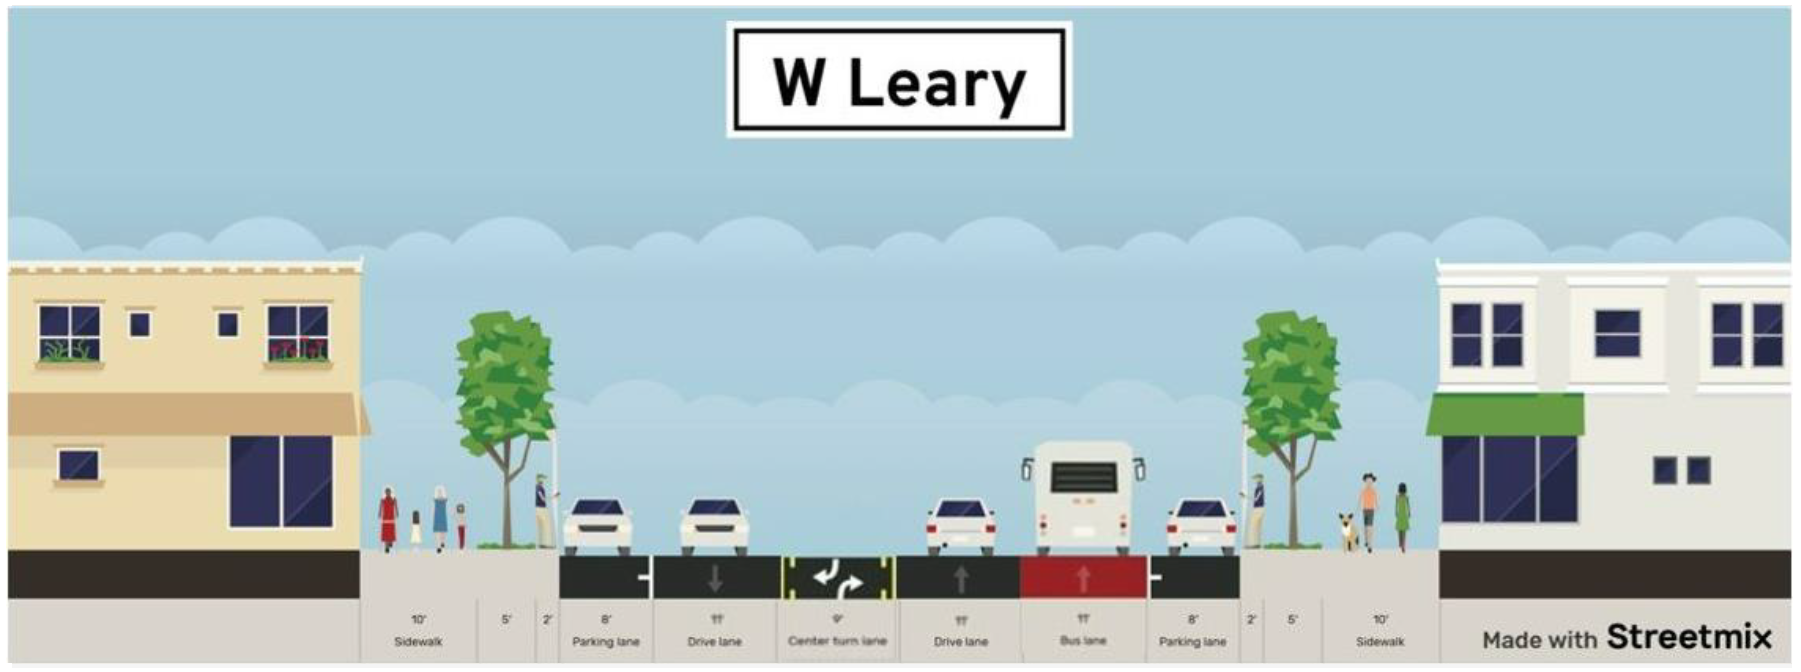 A cross section of W Leary showing one bus lane, two vehicle lanes, and one turn lane and two parking lanes, a 10' sidewalk and 5' planting strip